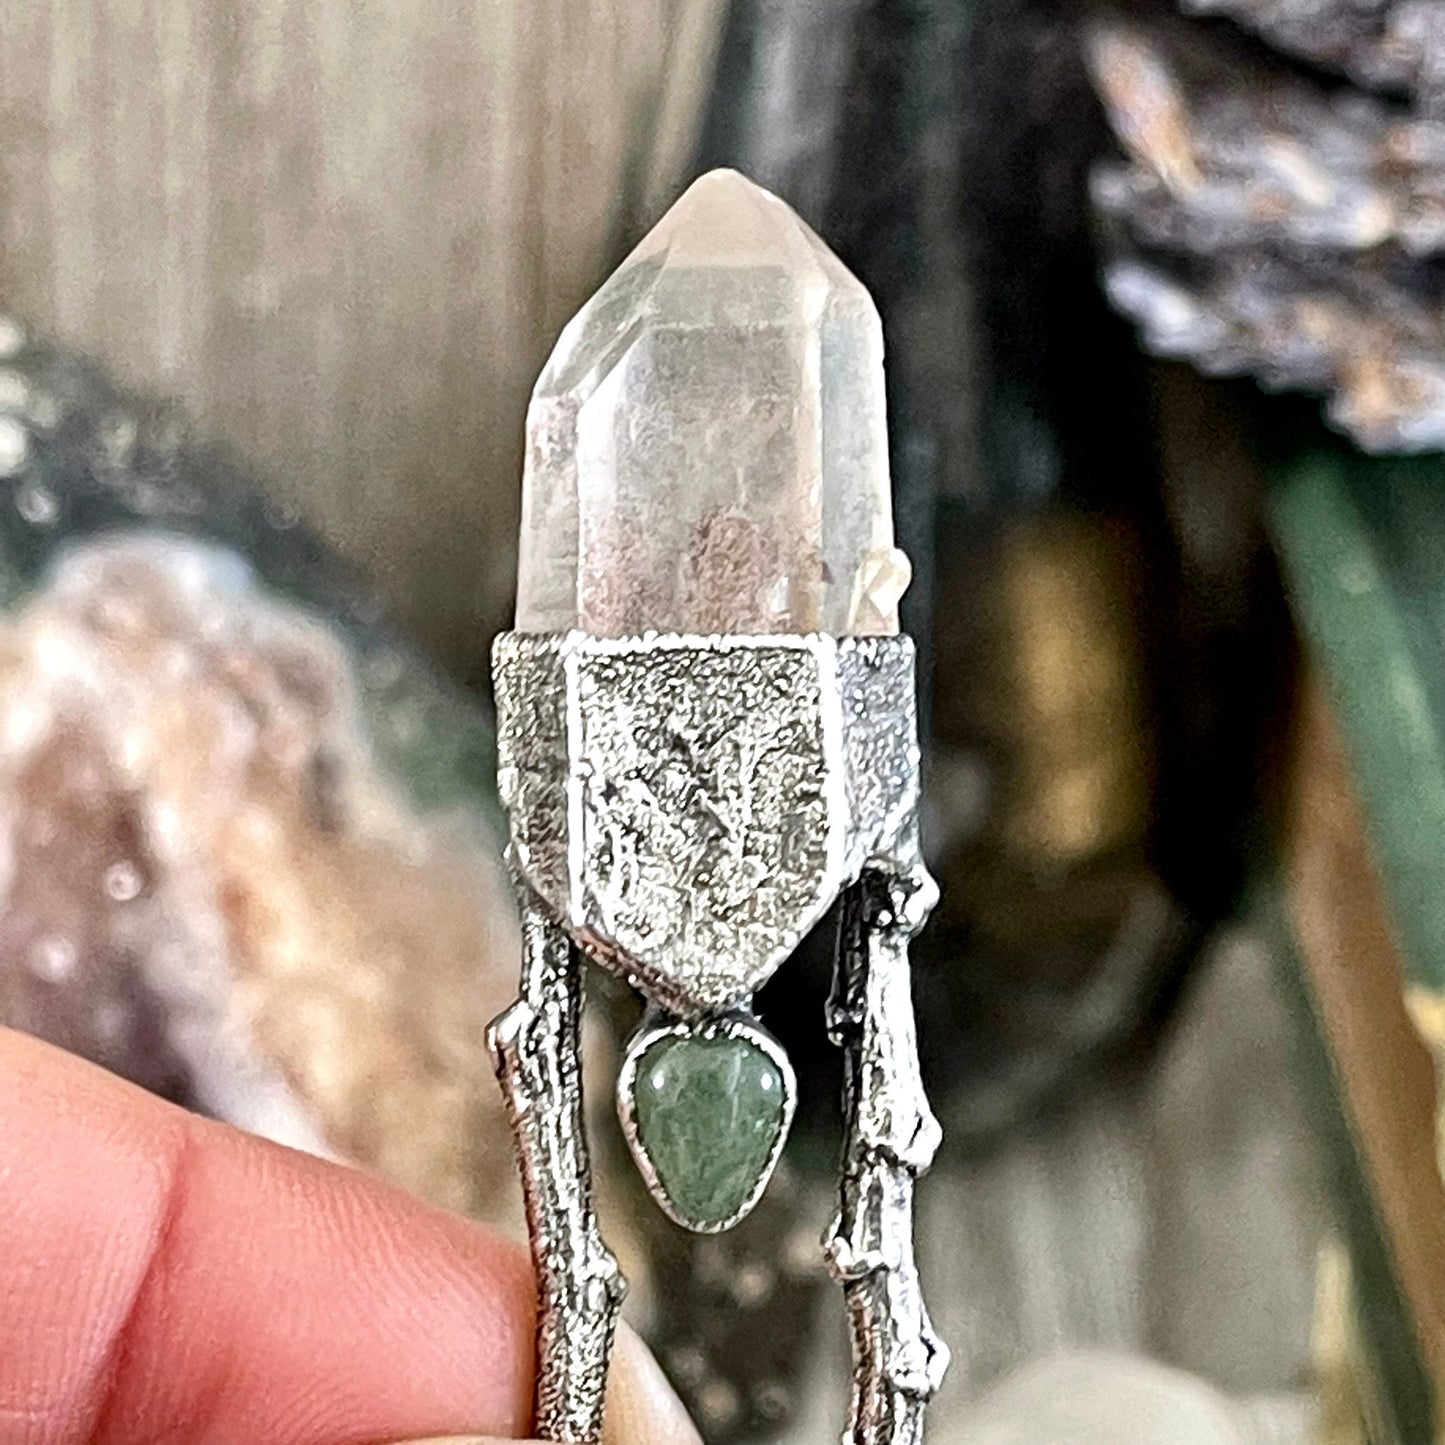 big crystal Necklace, Bohemian Jewelry, Crystal Necklaces, Crystal Pendant, Etsy ID: 1669644277, FOXLARK- NECKLACES, Jewelry, nature inspired, Necklaces, Quartz pendent, Raw Quartz jewelry, Silver Jewelry, Silver Necklace, Silver Stone Jewelry, Statement